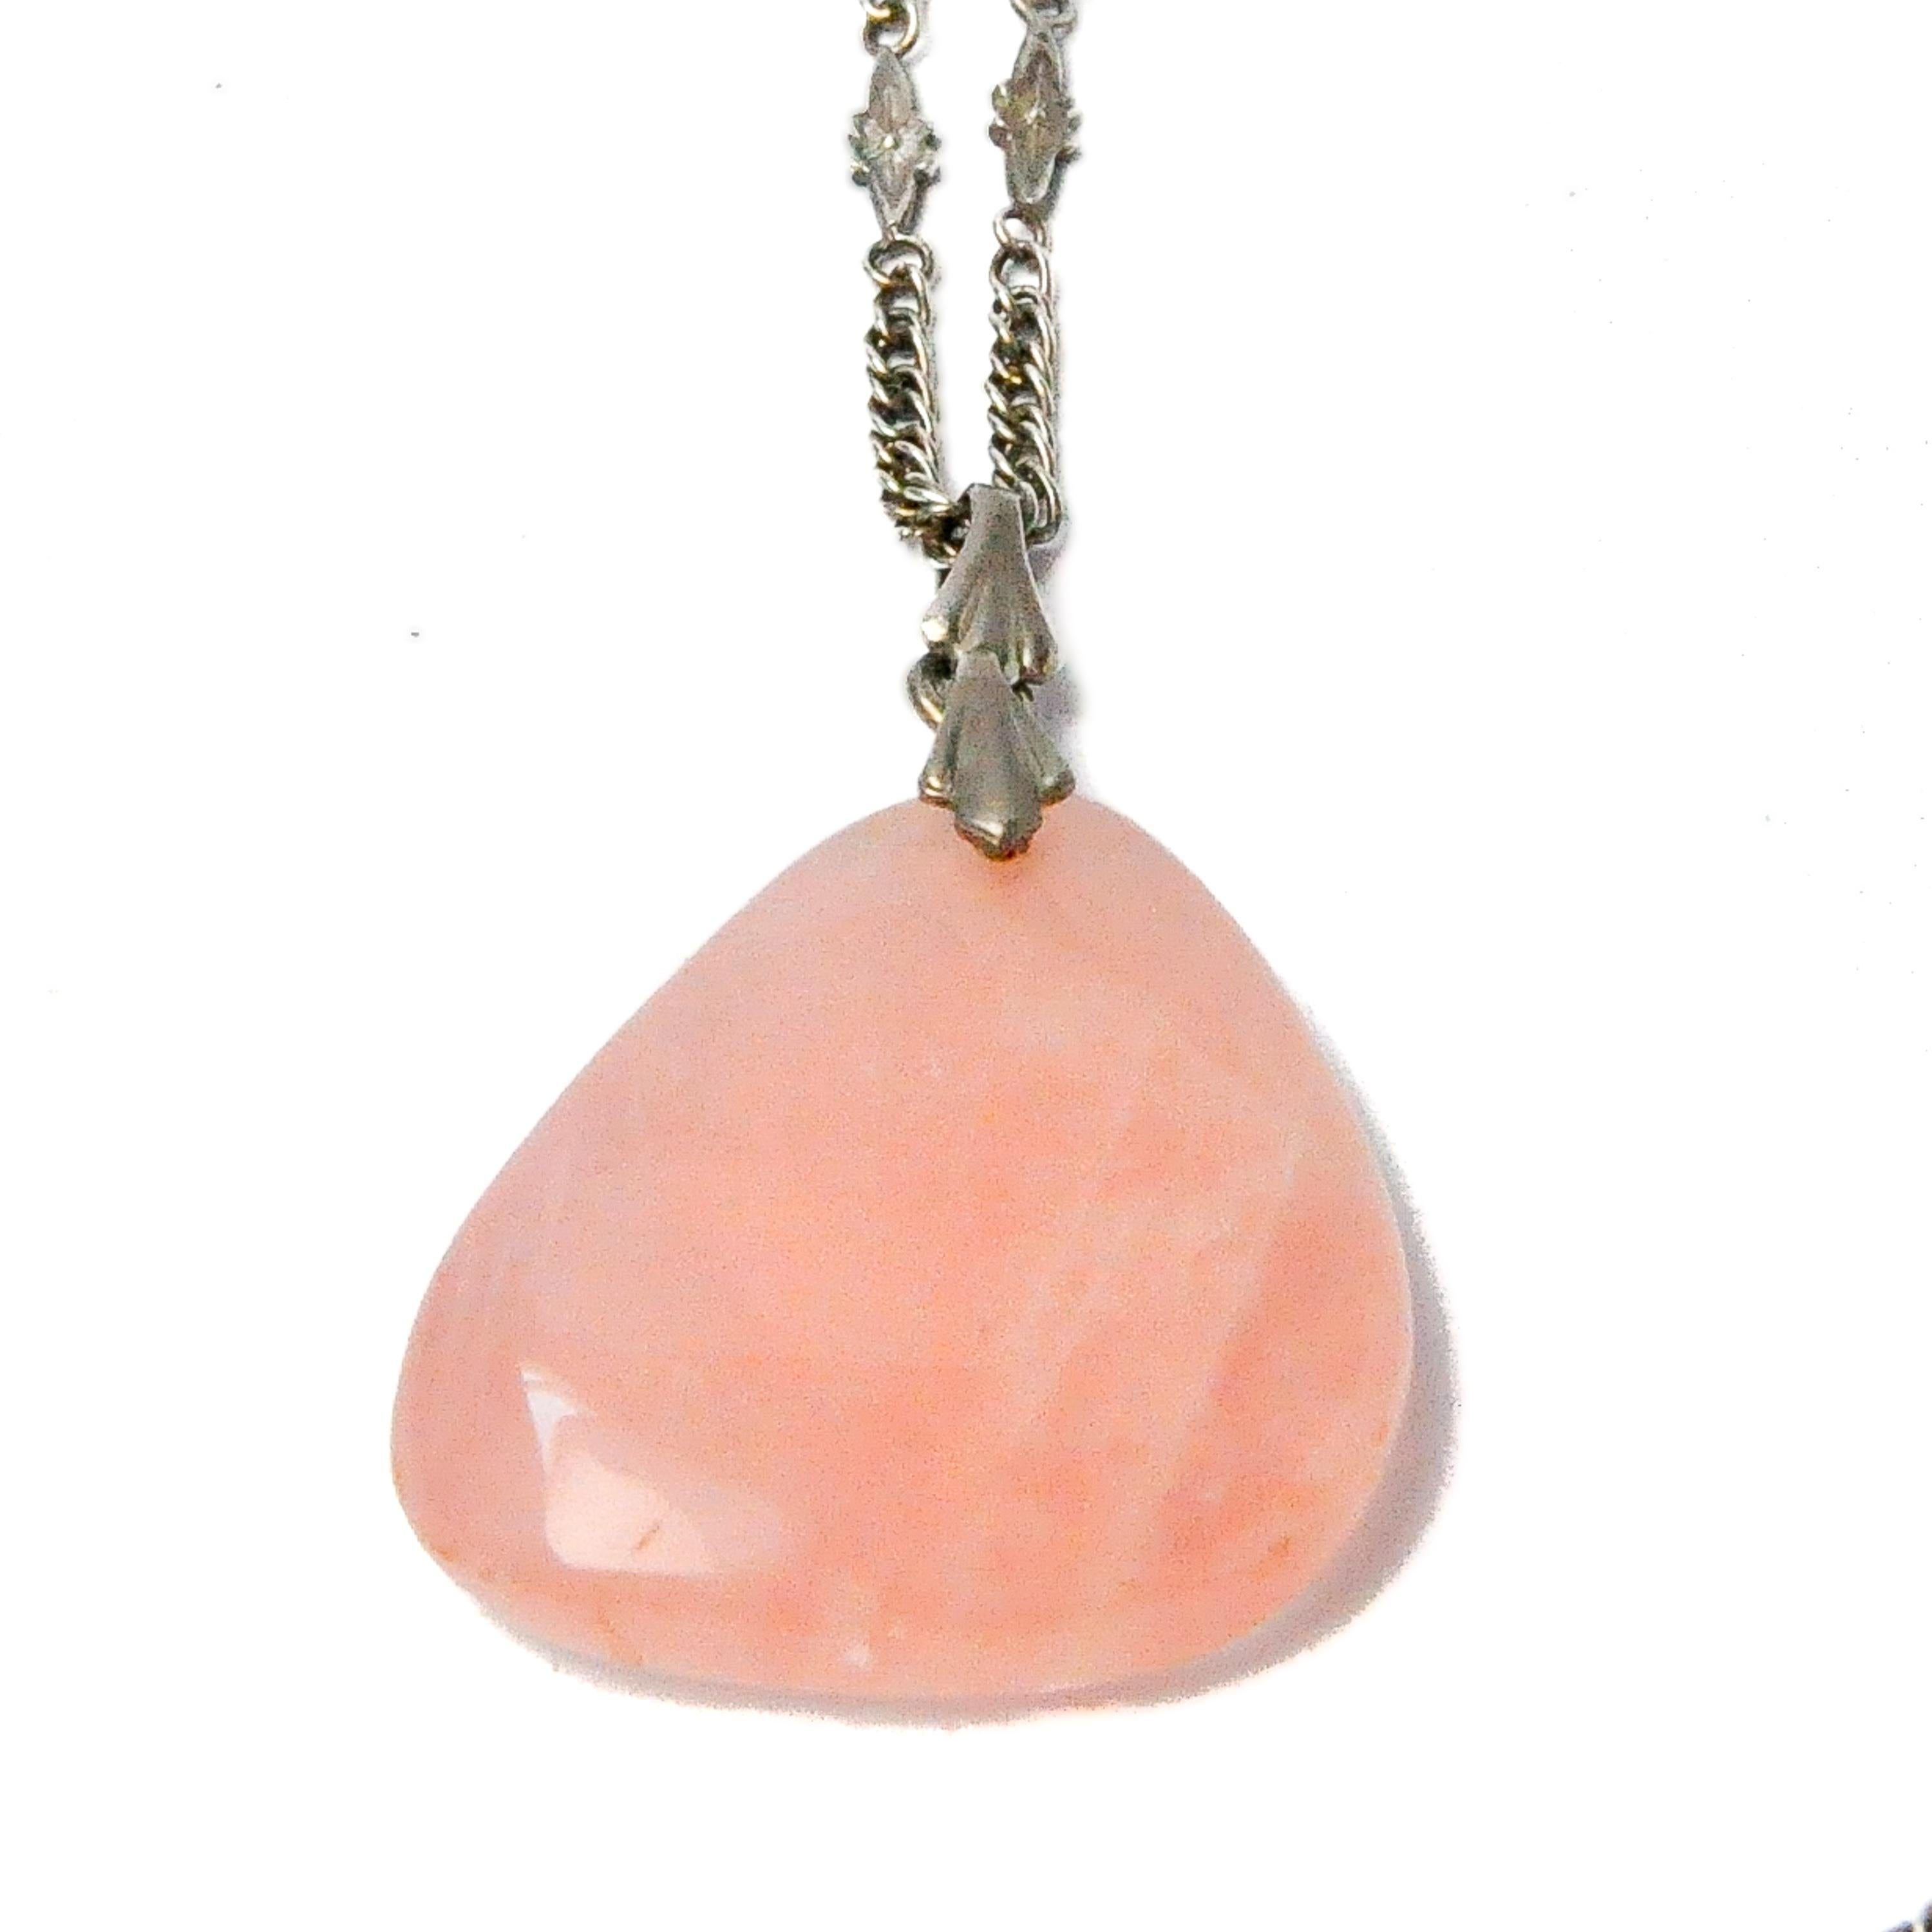 Rose quartz is pre-eminently the stone of the heart and love. It has a strong effect on the heart chakra and opens the heart to receive love and to give love. This lovely and large rose quartz gem on a silver chain necklace pendant will radiate and